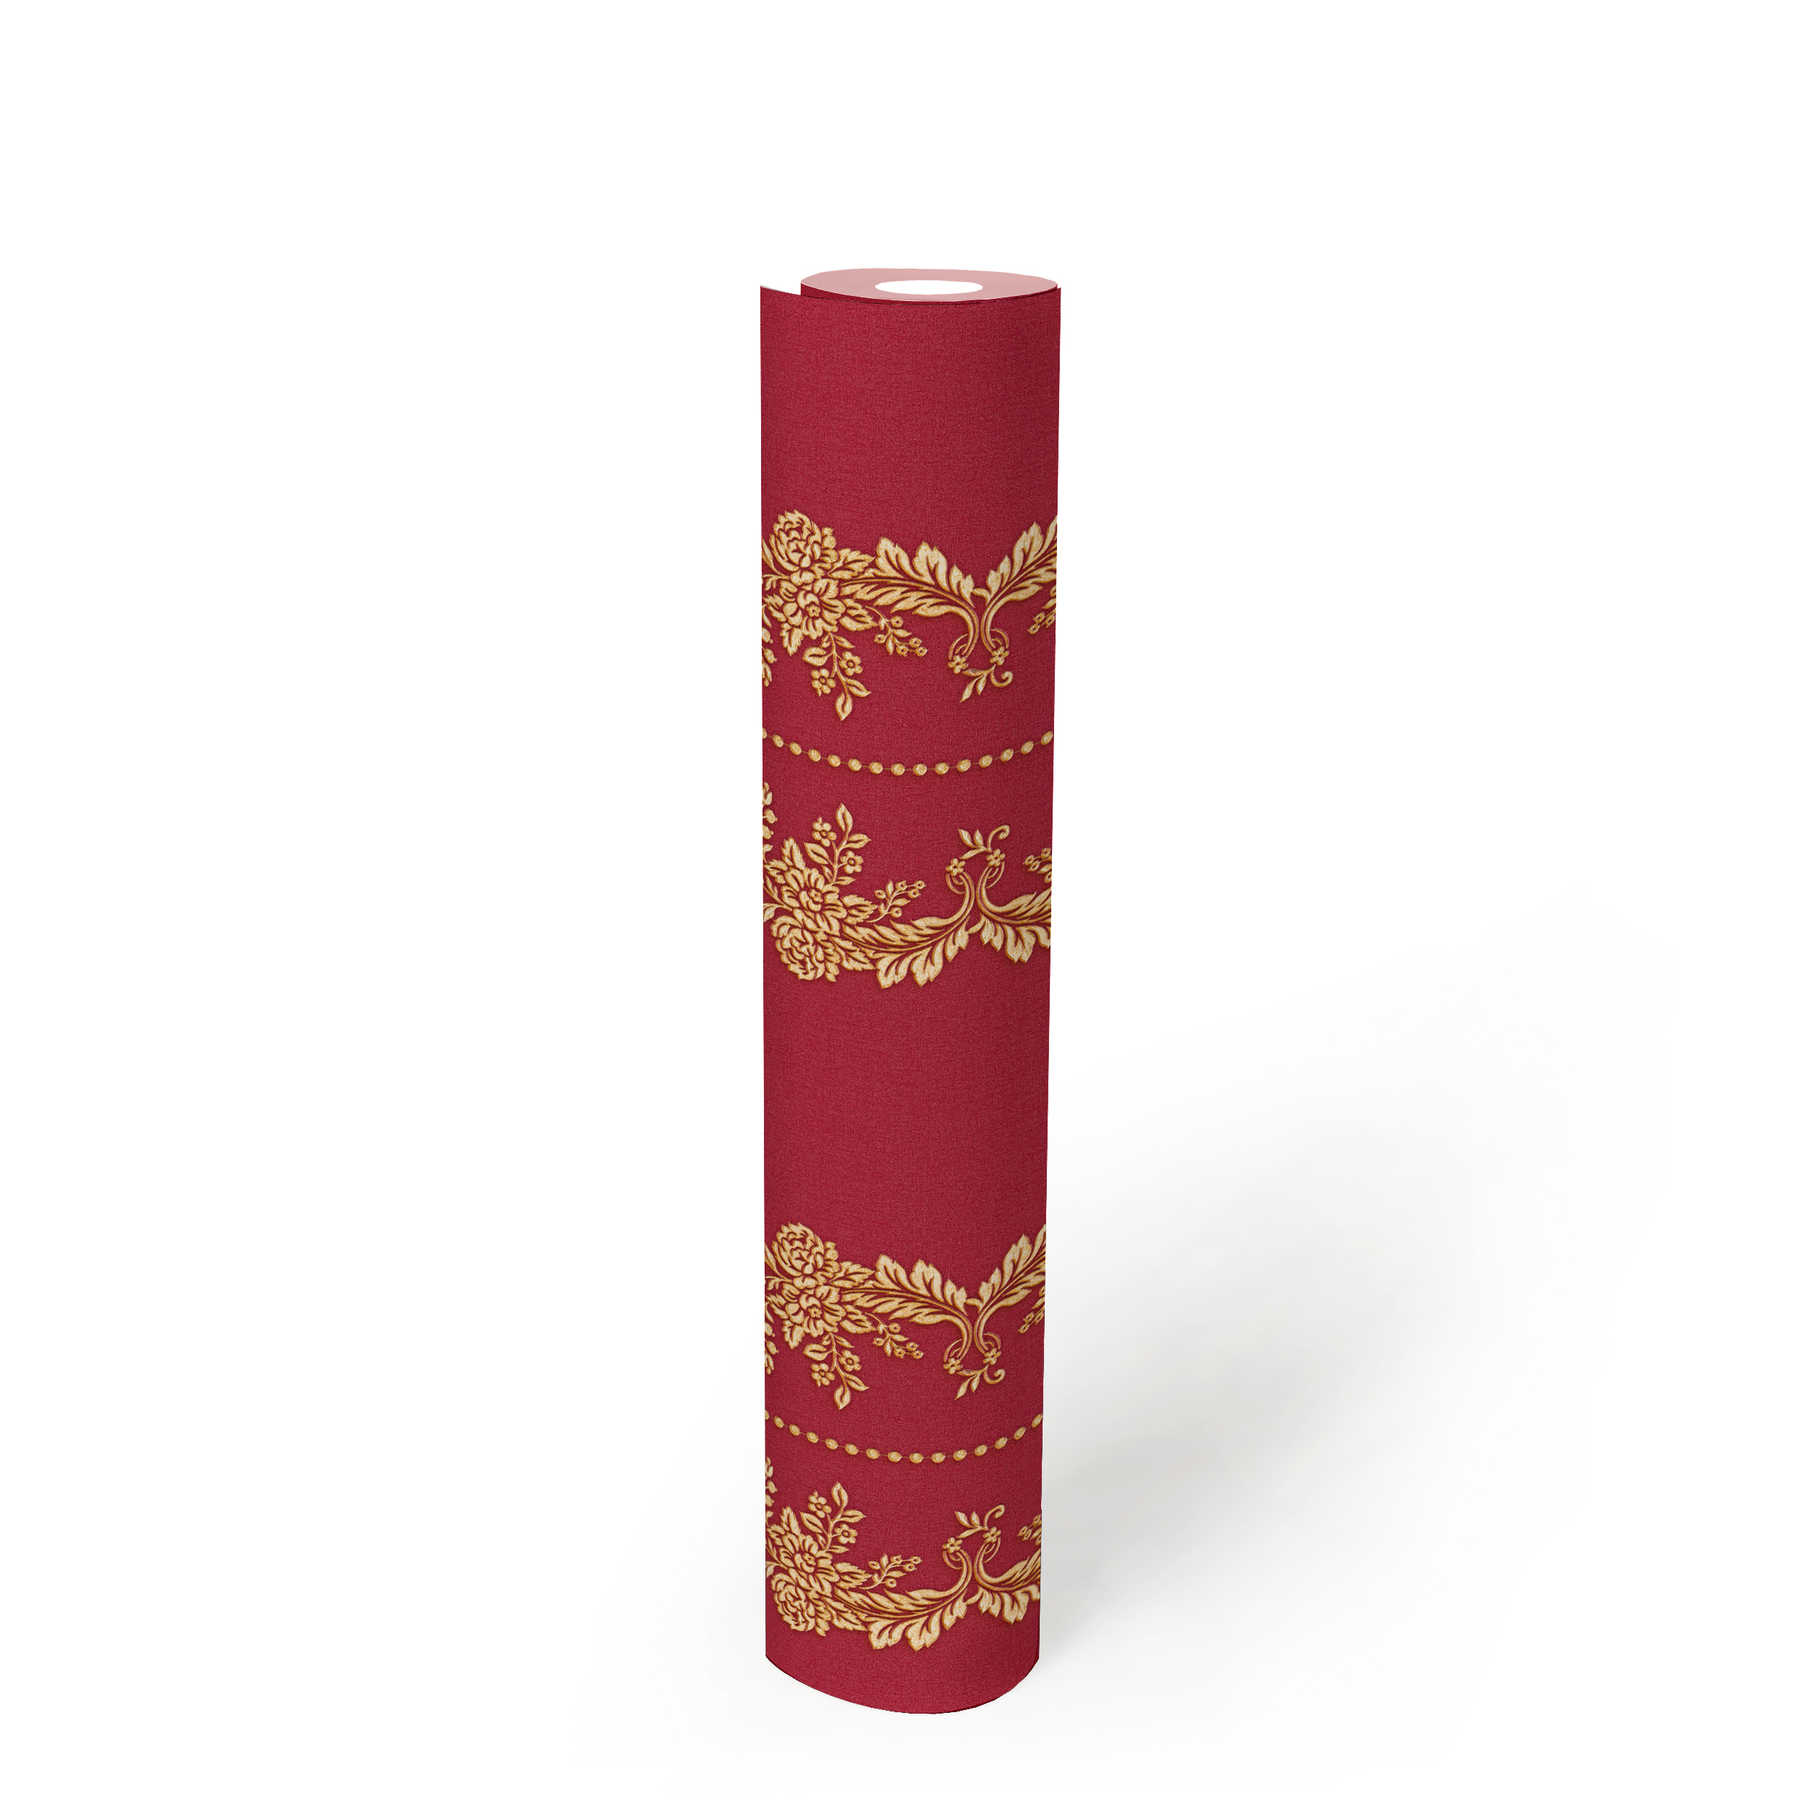             Classic ornament wallpaper with gold effect - metallic, red
        